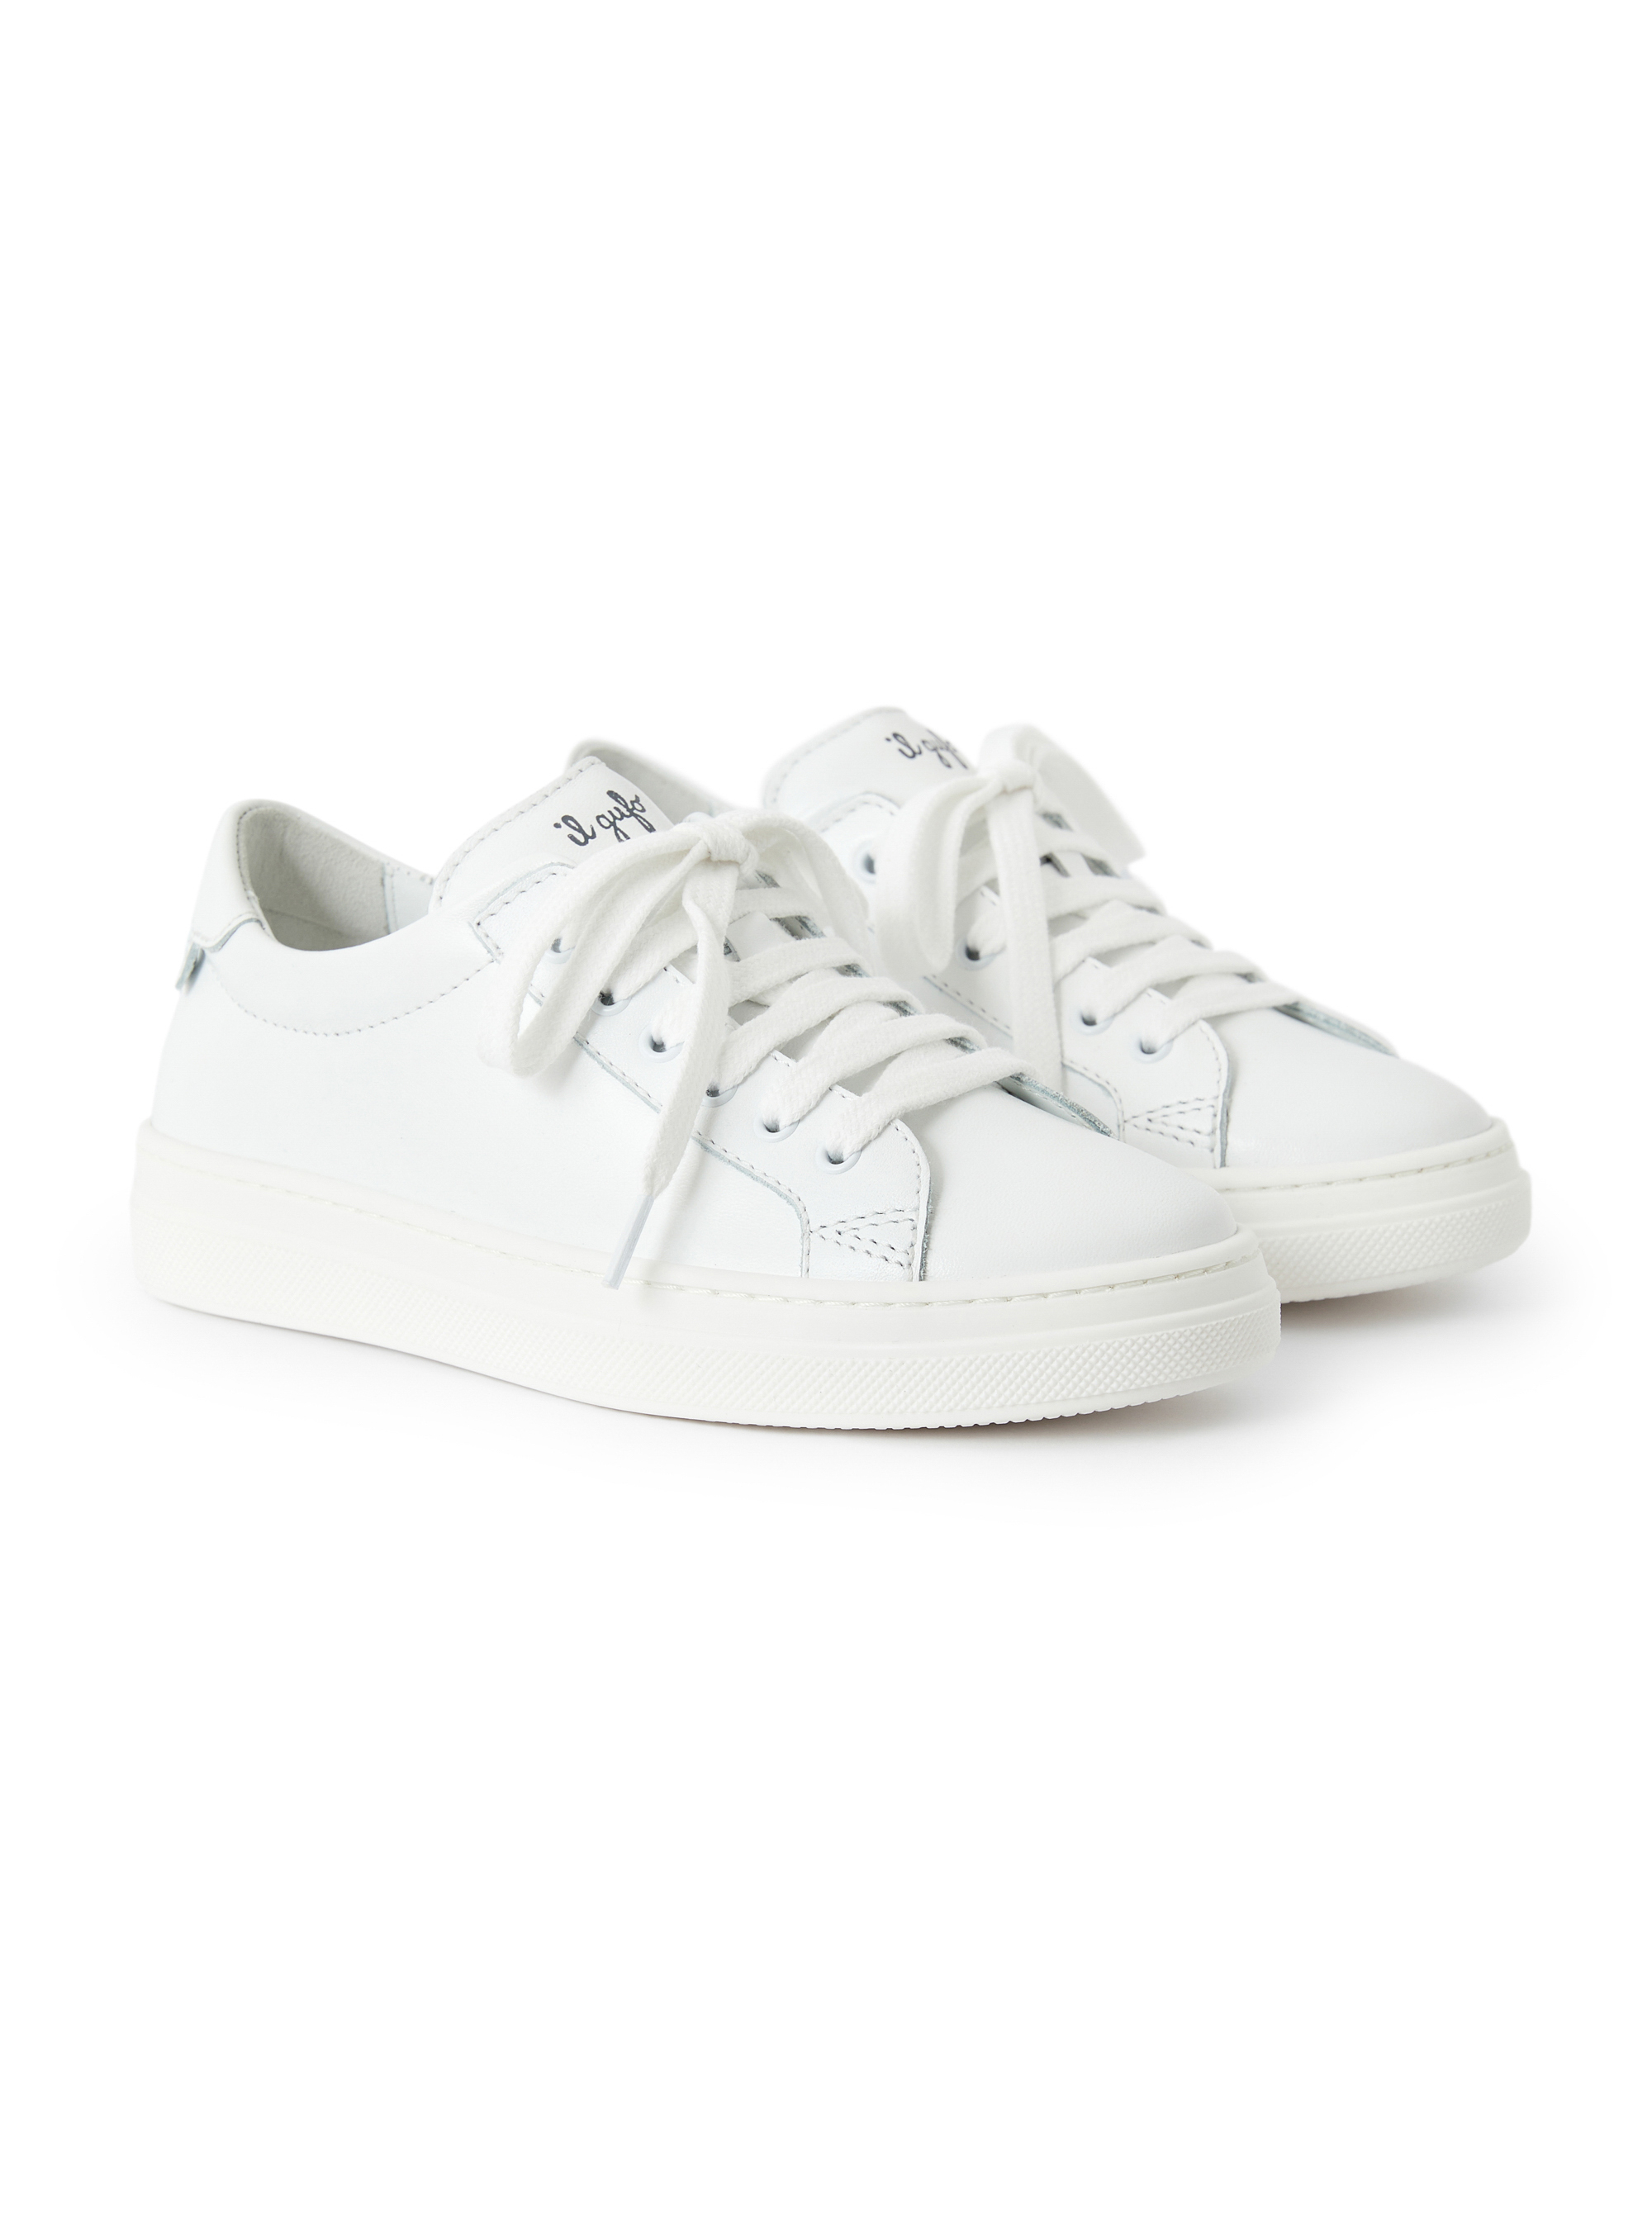 Sneakers en cuir blanches - Chaussures - Il Gufo